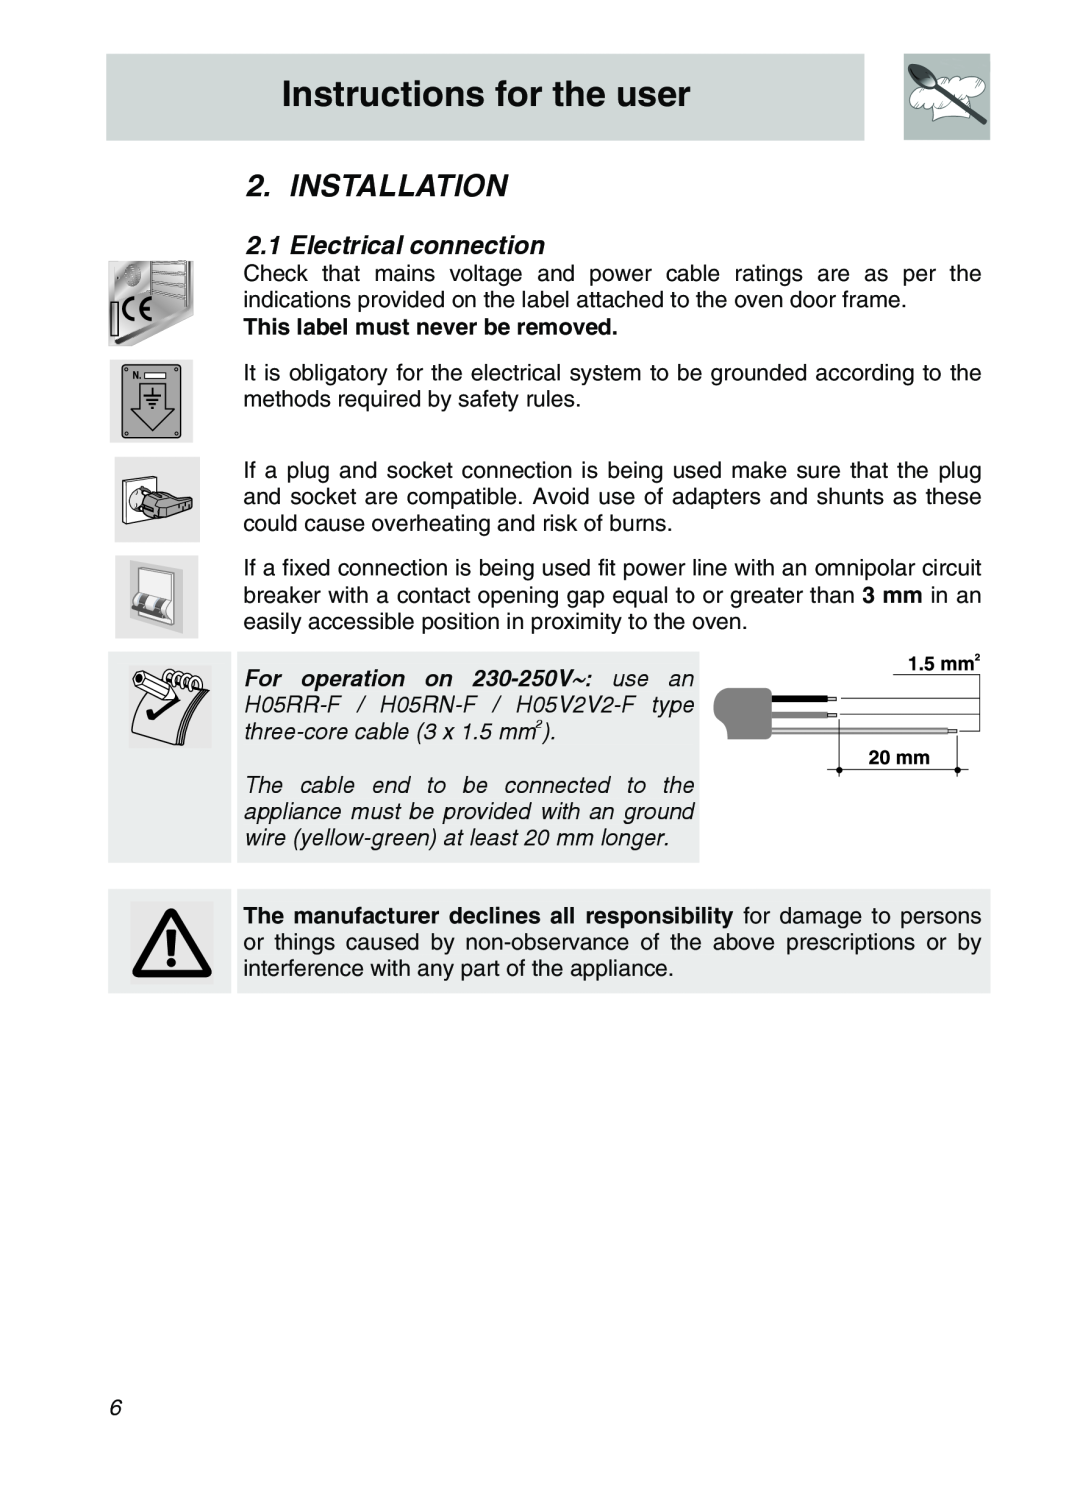 Smeg FA170, FA166-5 manual Instructions for the user, Installation, Electrical connection, This label must never be removed 